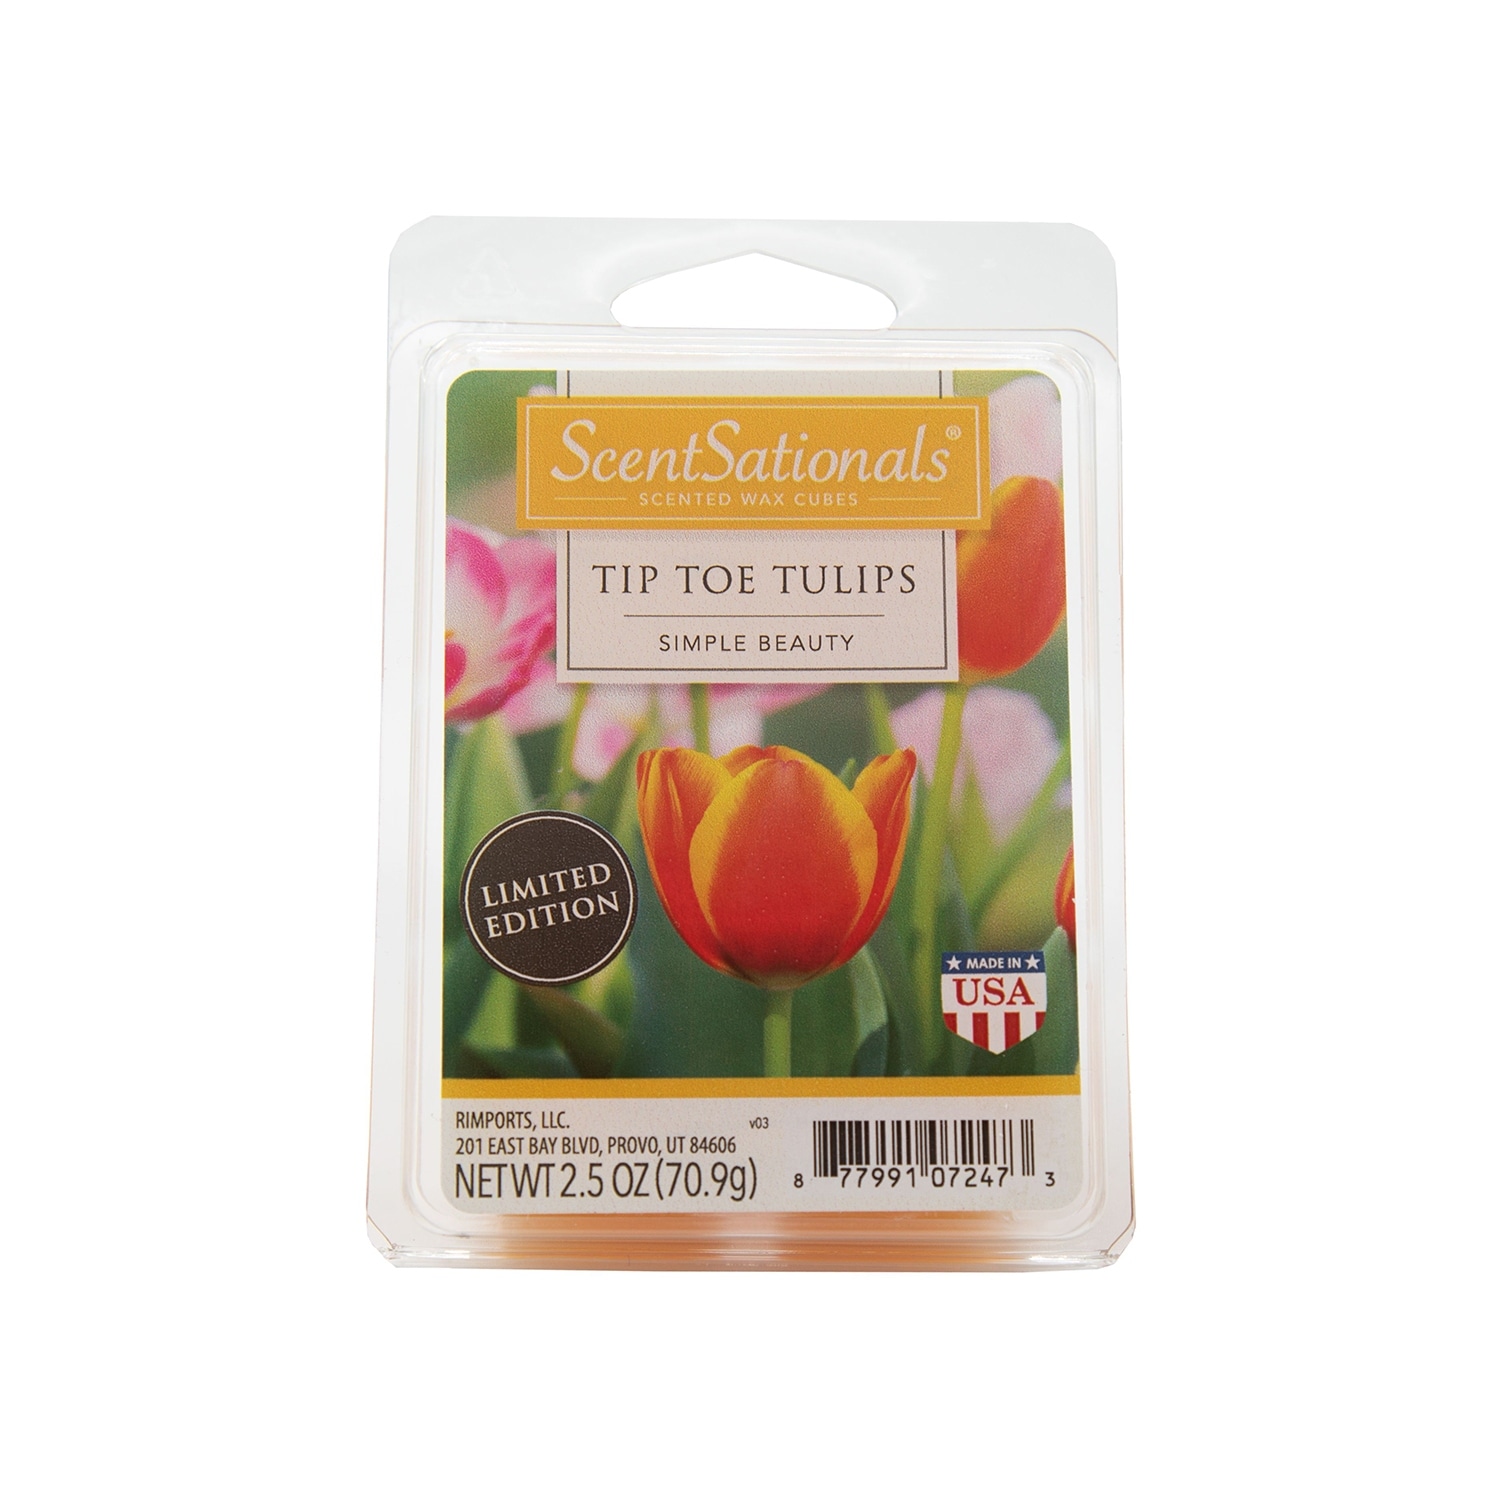 Scentsationals Tip Toe Tulips 2.5 oz Fragrant Wax Melts - 6 Scented Wax  Cubes - Bed Bath & Beyond - 30838459